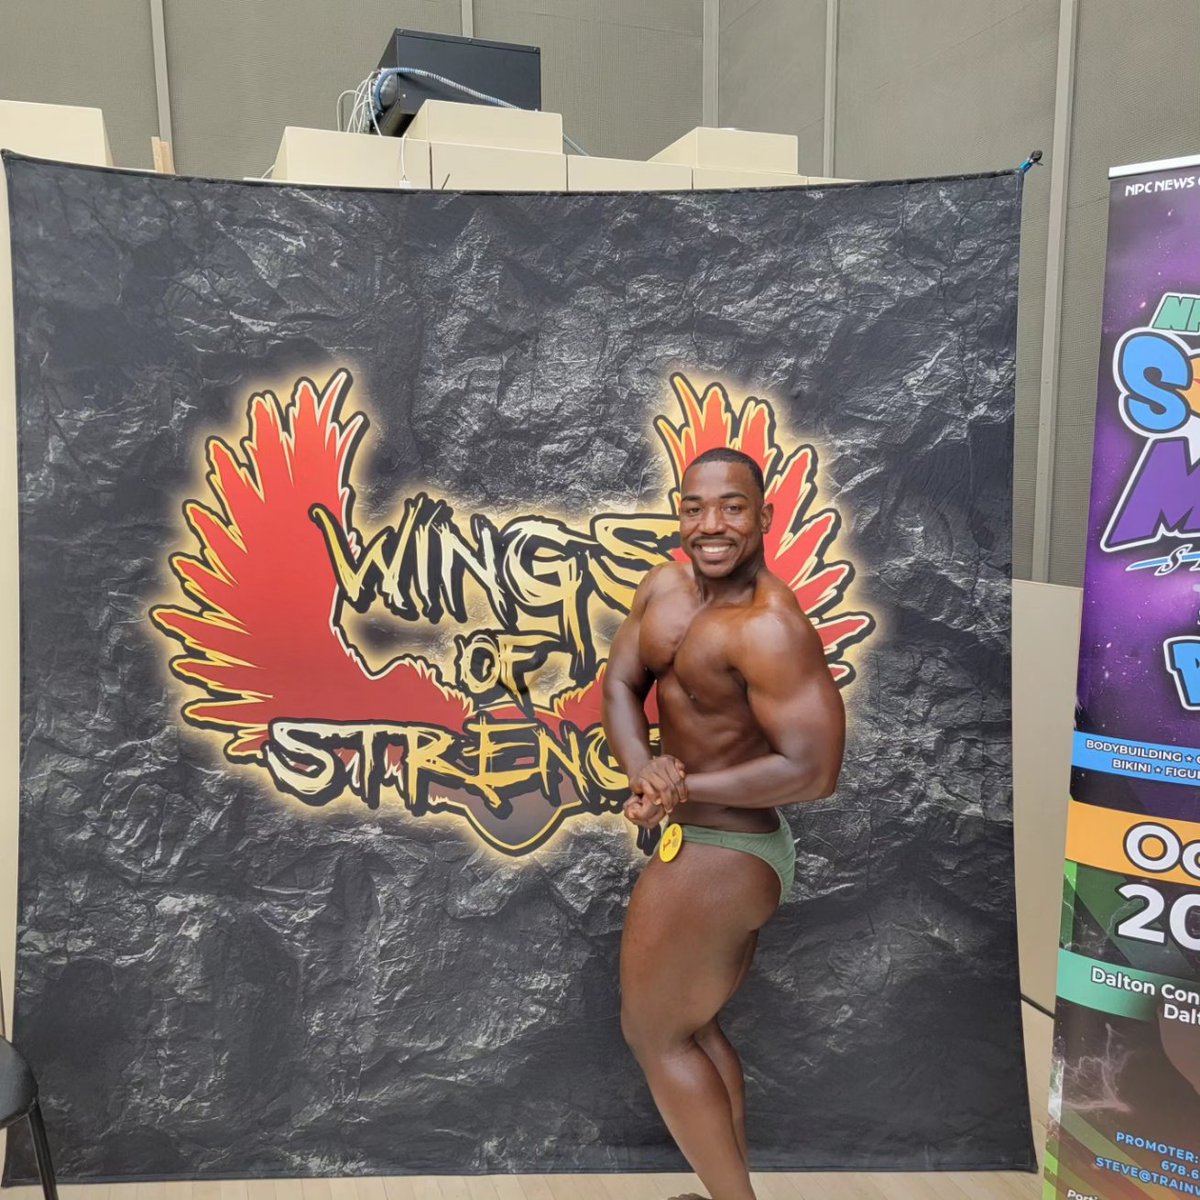 First bodybuilding show. Had a great time. #wingsofstrength